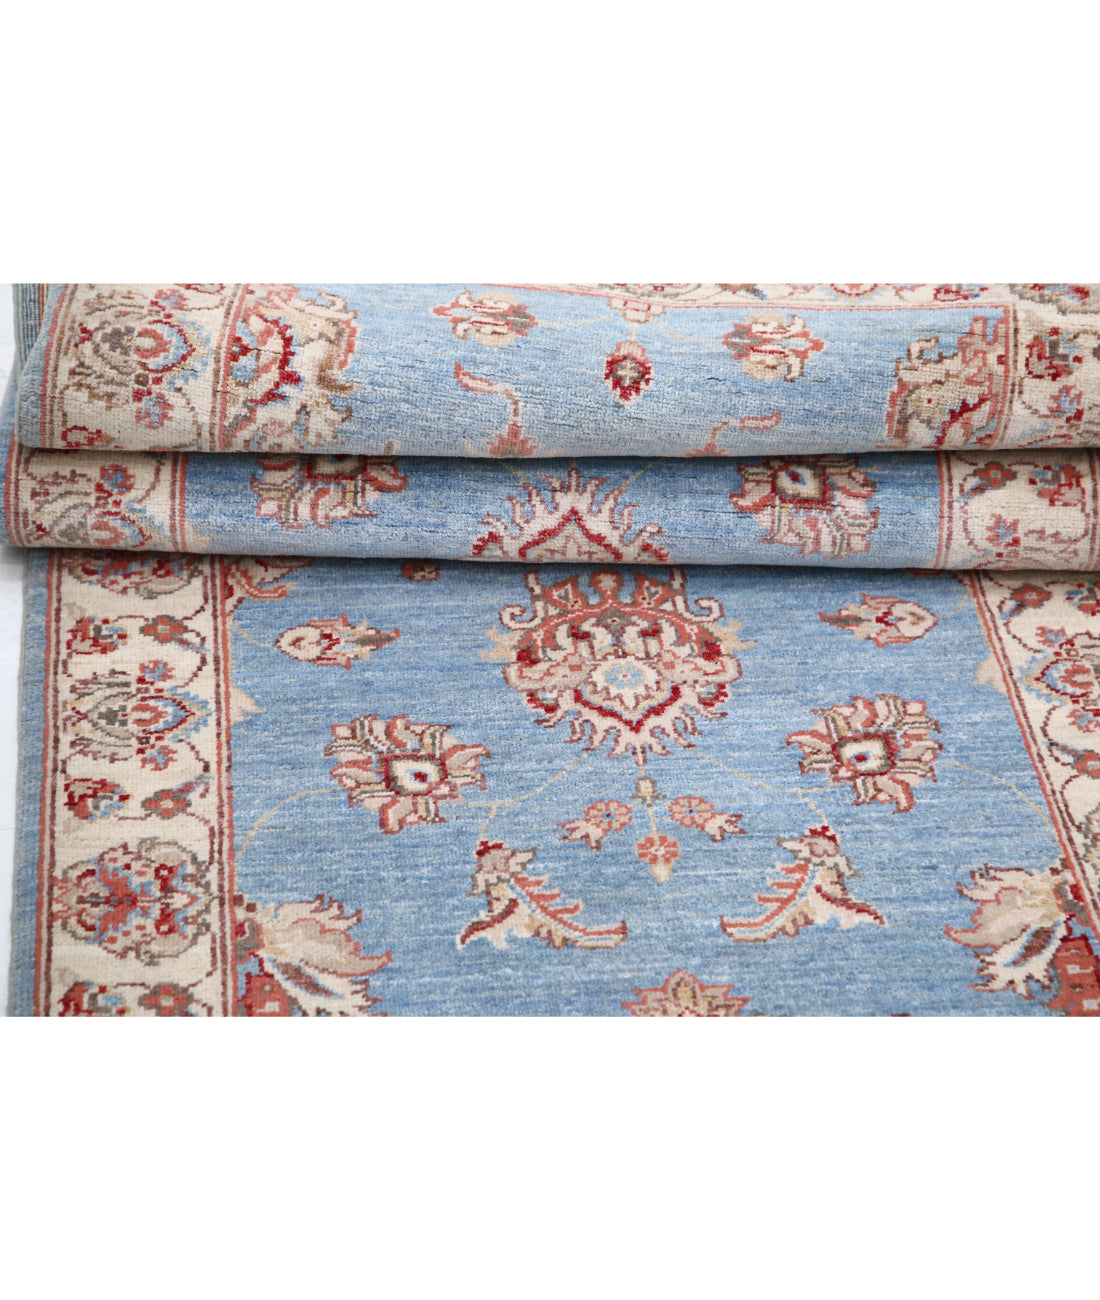 Ziegler 2'9'' X 8'2'' Hand-Knotted Wool Rug 2'9'' x 8'2'' (83 X 245) / Blue / Ivory